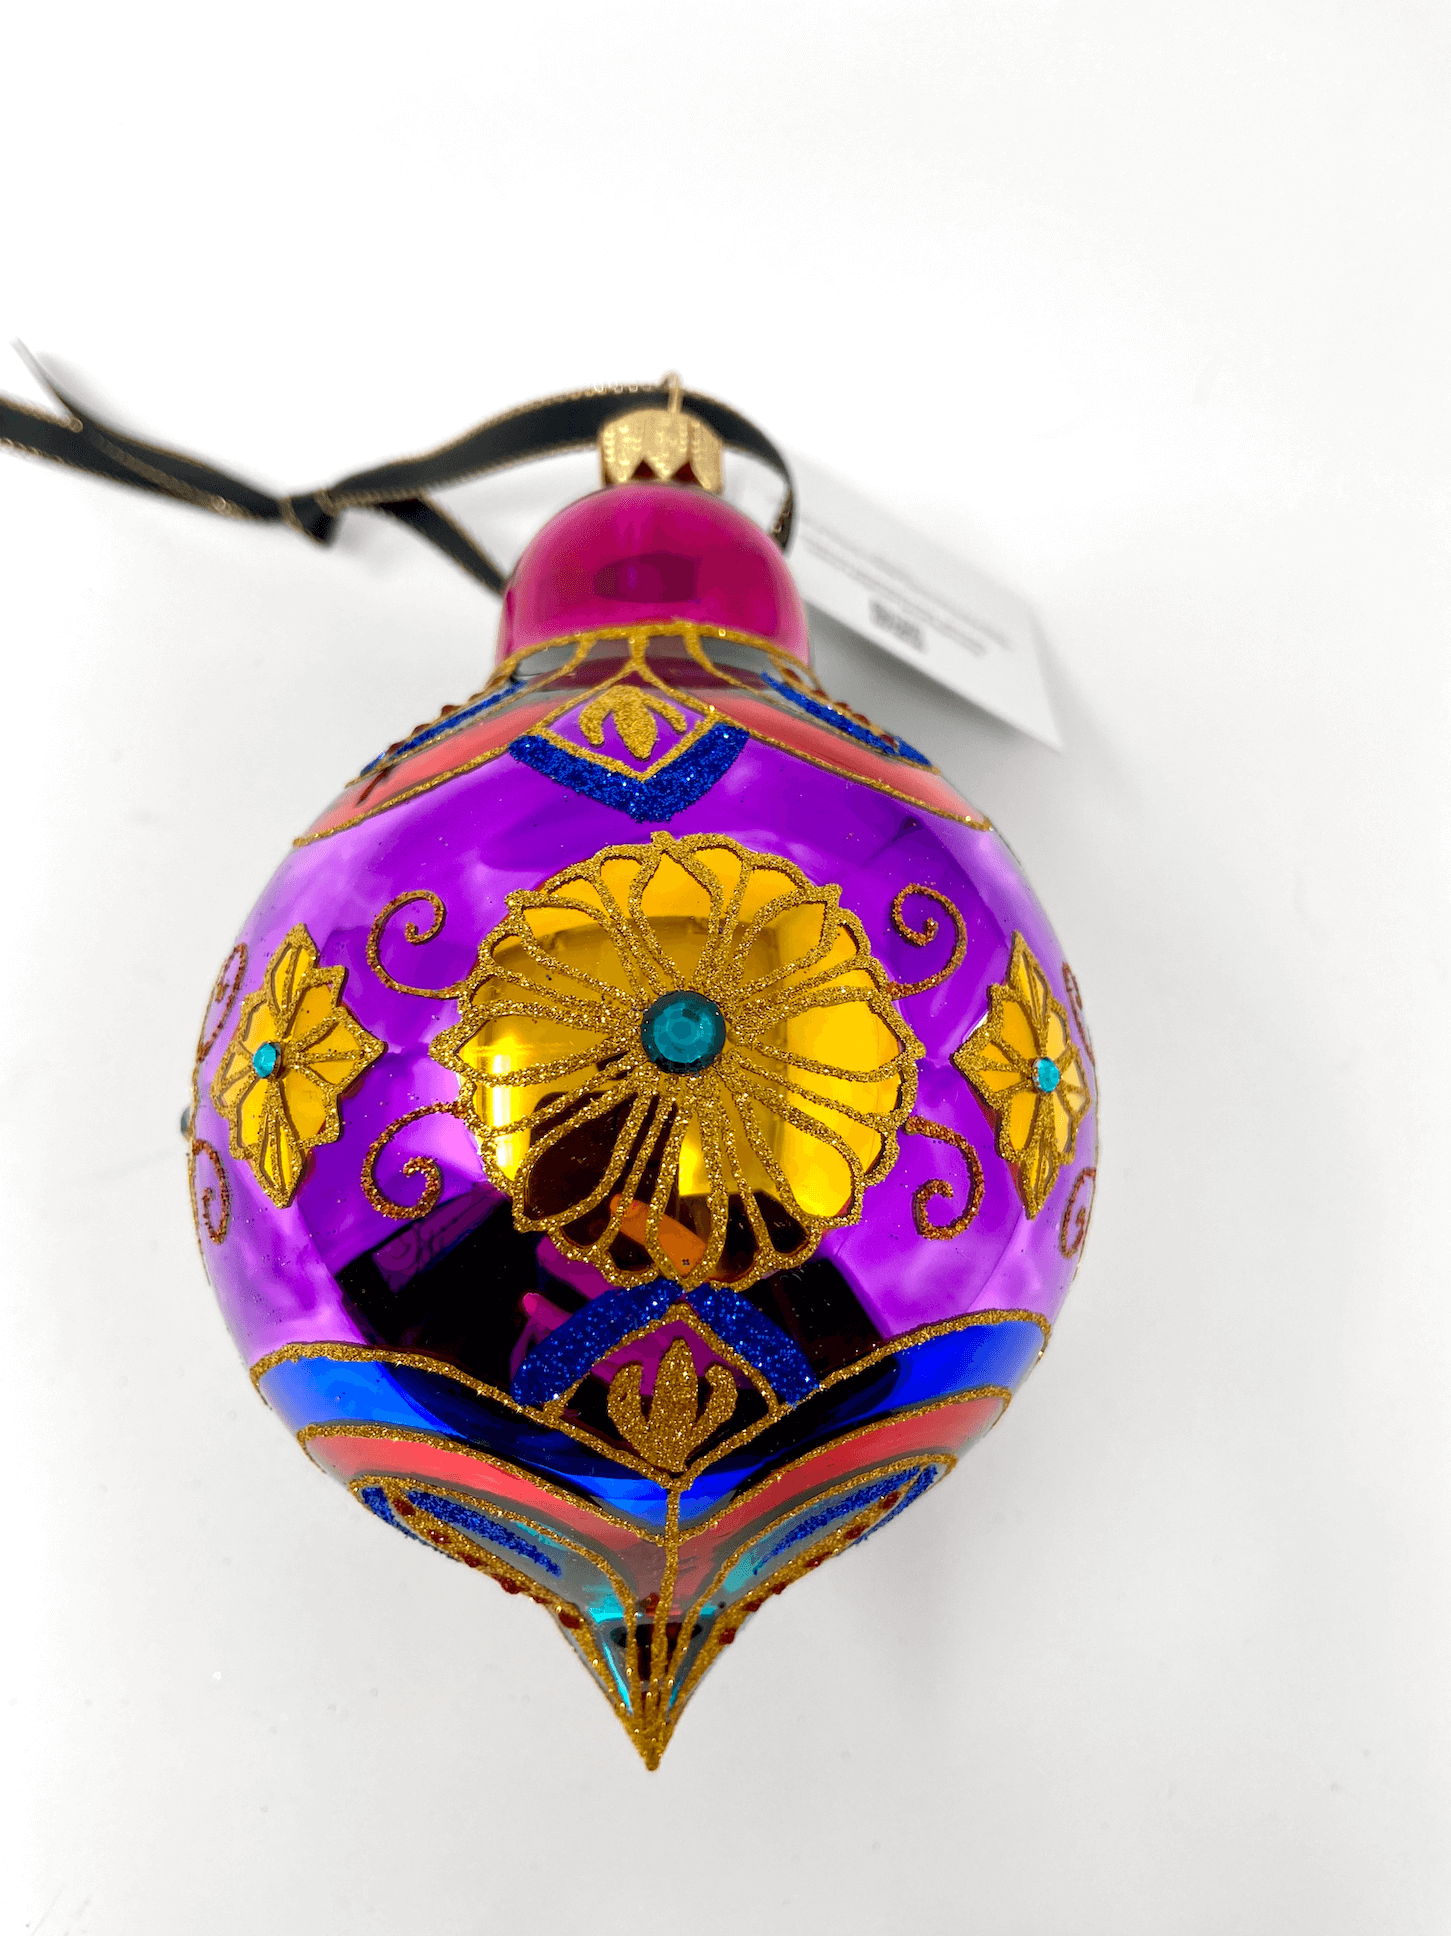 Gorgeously intricately detailed colorful polish glass ornament with gold detailing and colorful accents.